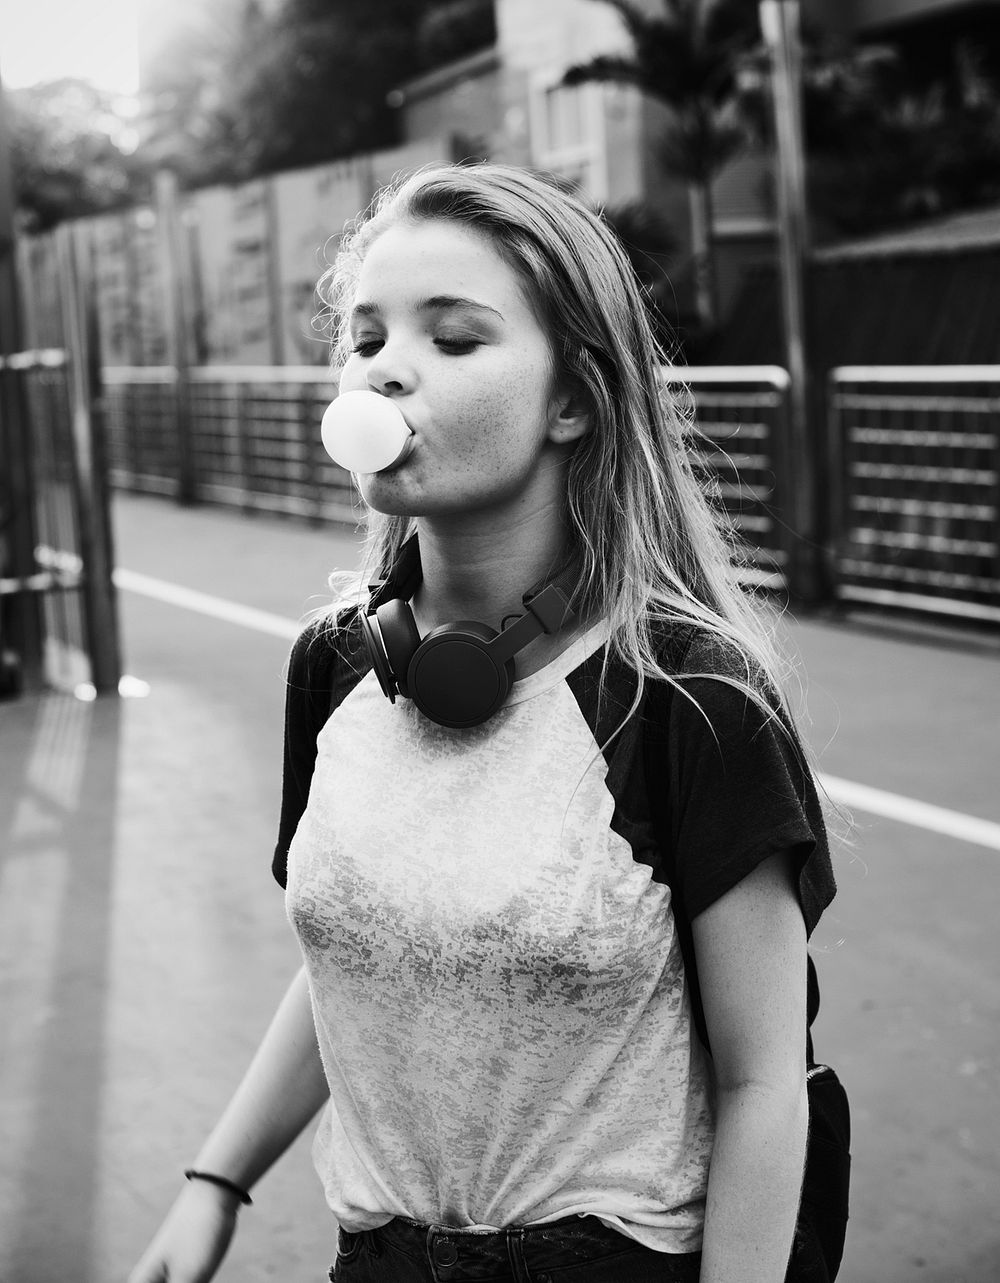 Carefree young woman chewing a bubble gum